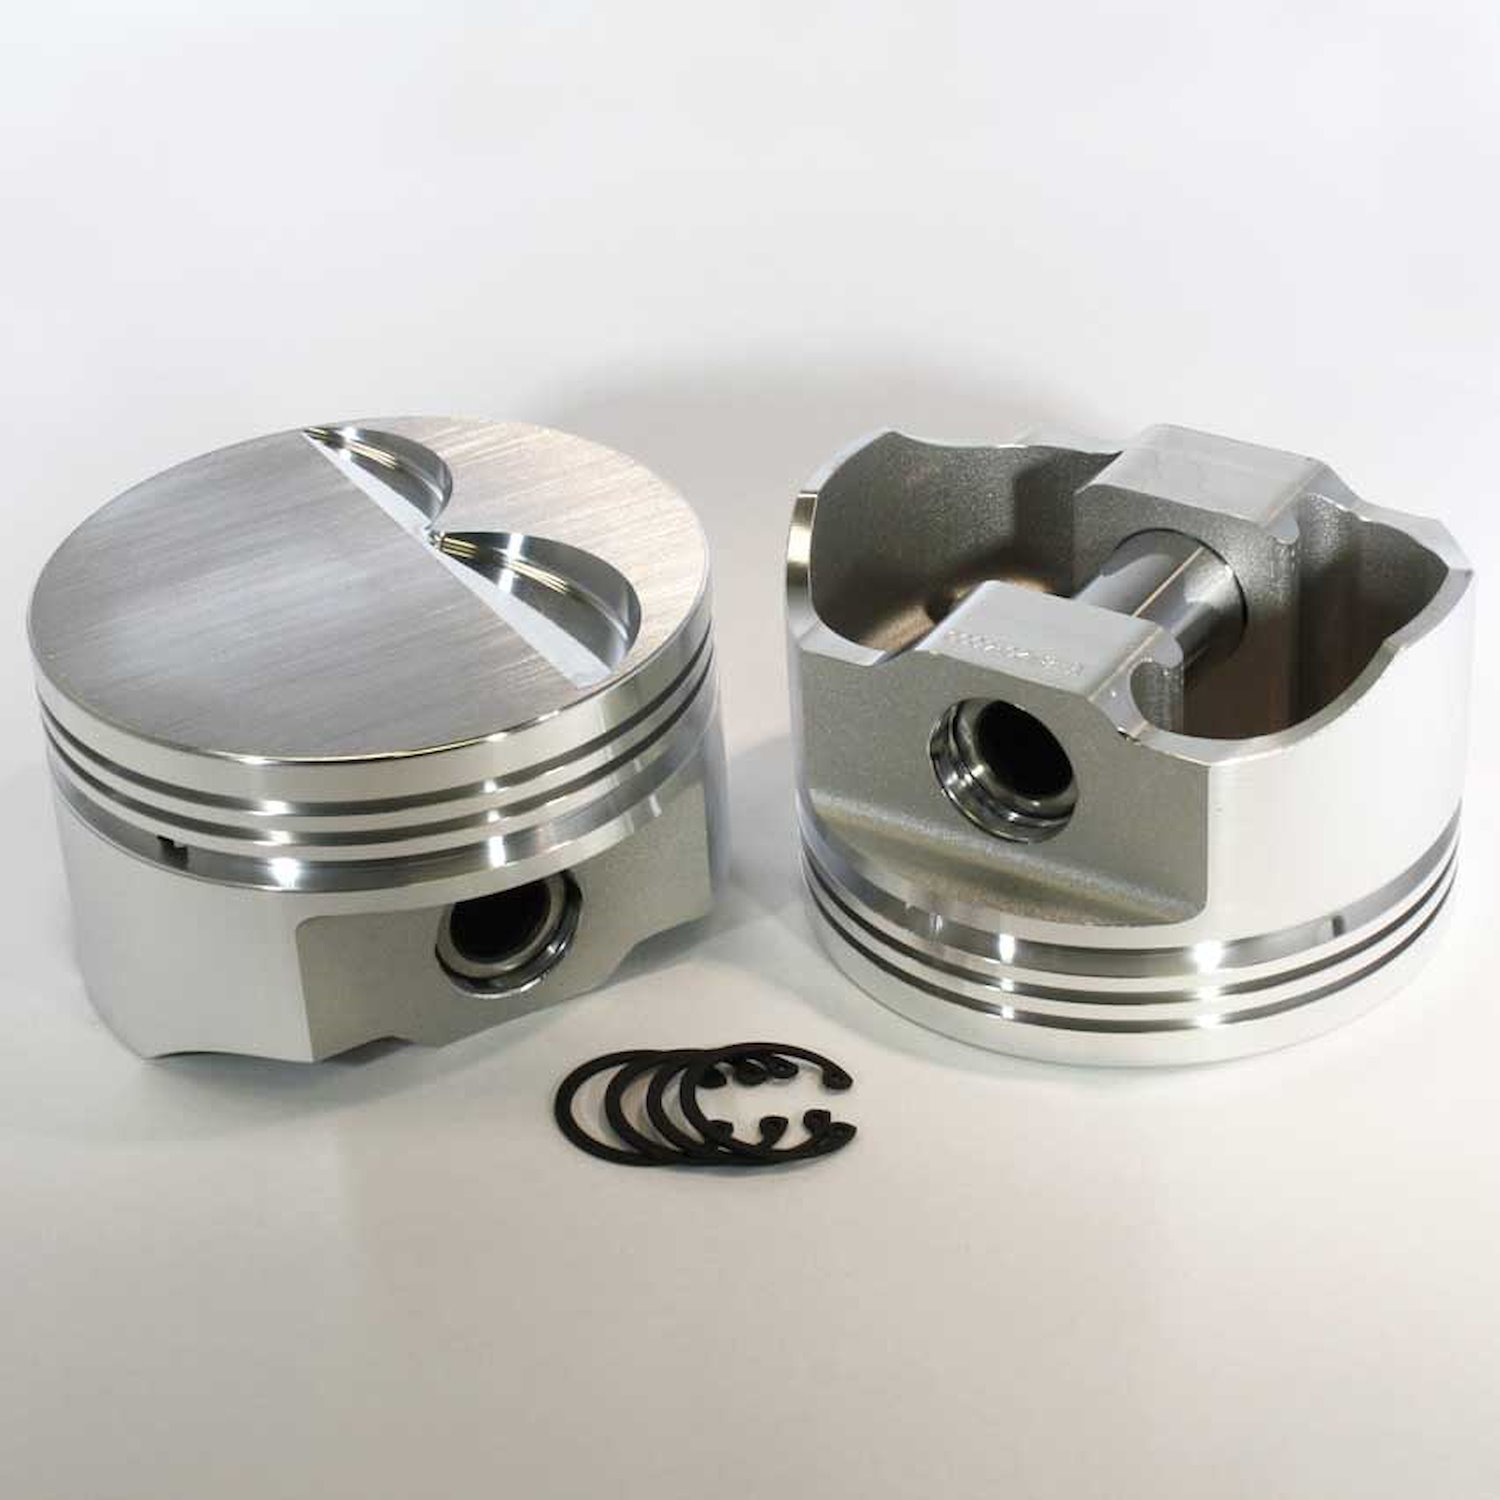 8770-3913 E-Series Flat Top Piston Set for 1997-2005 Chevy LS, 3.913 in. Bore, -3cc Volume [OEM Stroke]